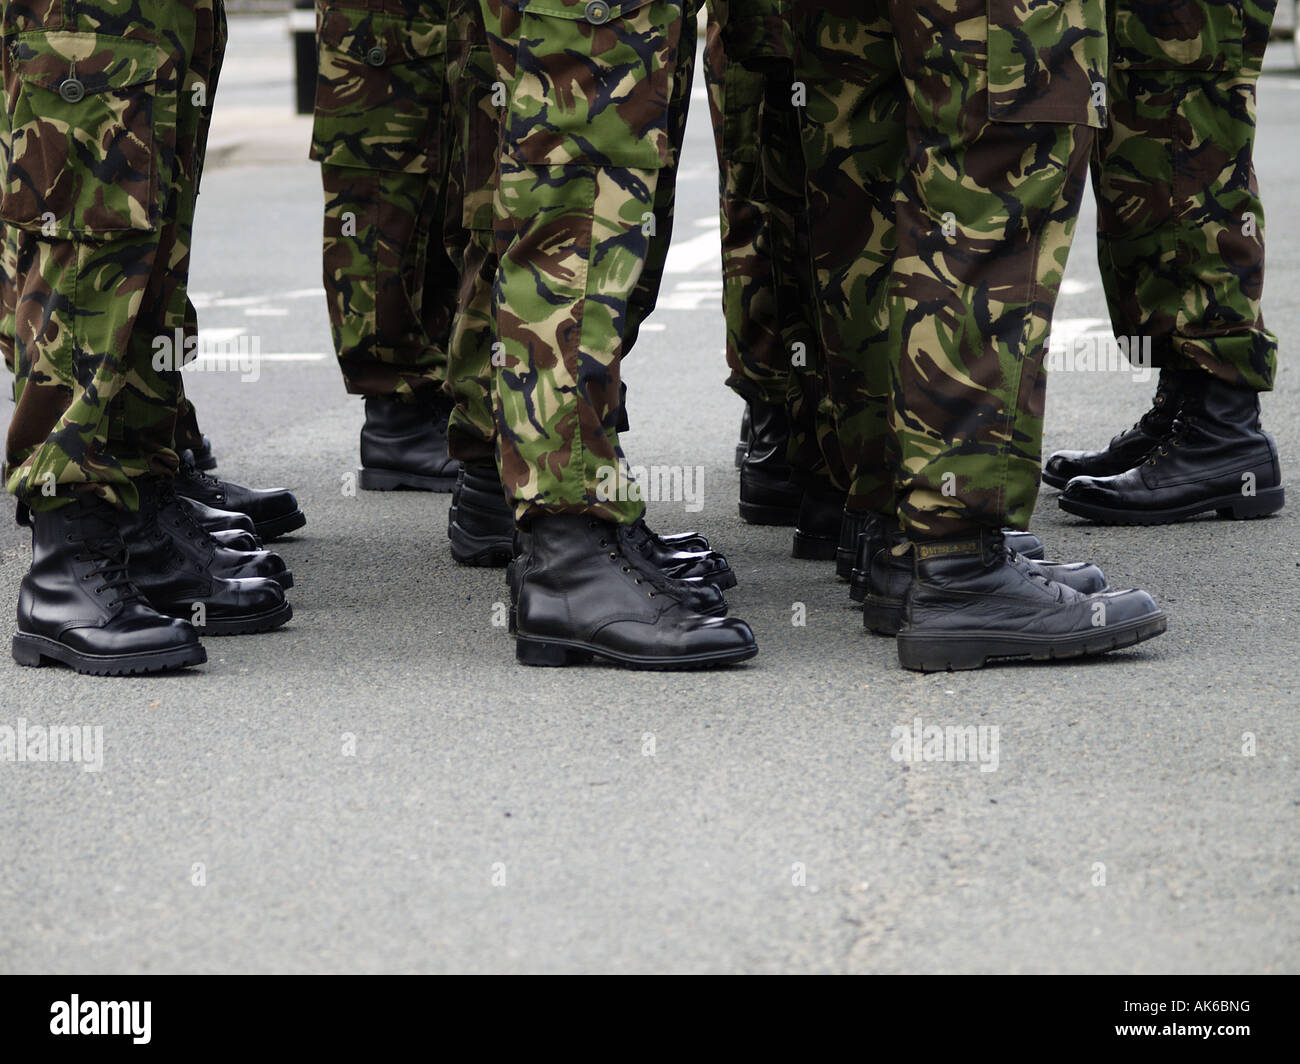 Legs On Parade High Resolution Stock Photography and Images - Alamy